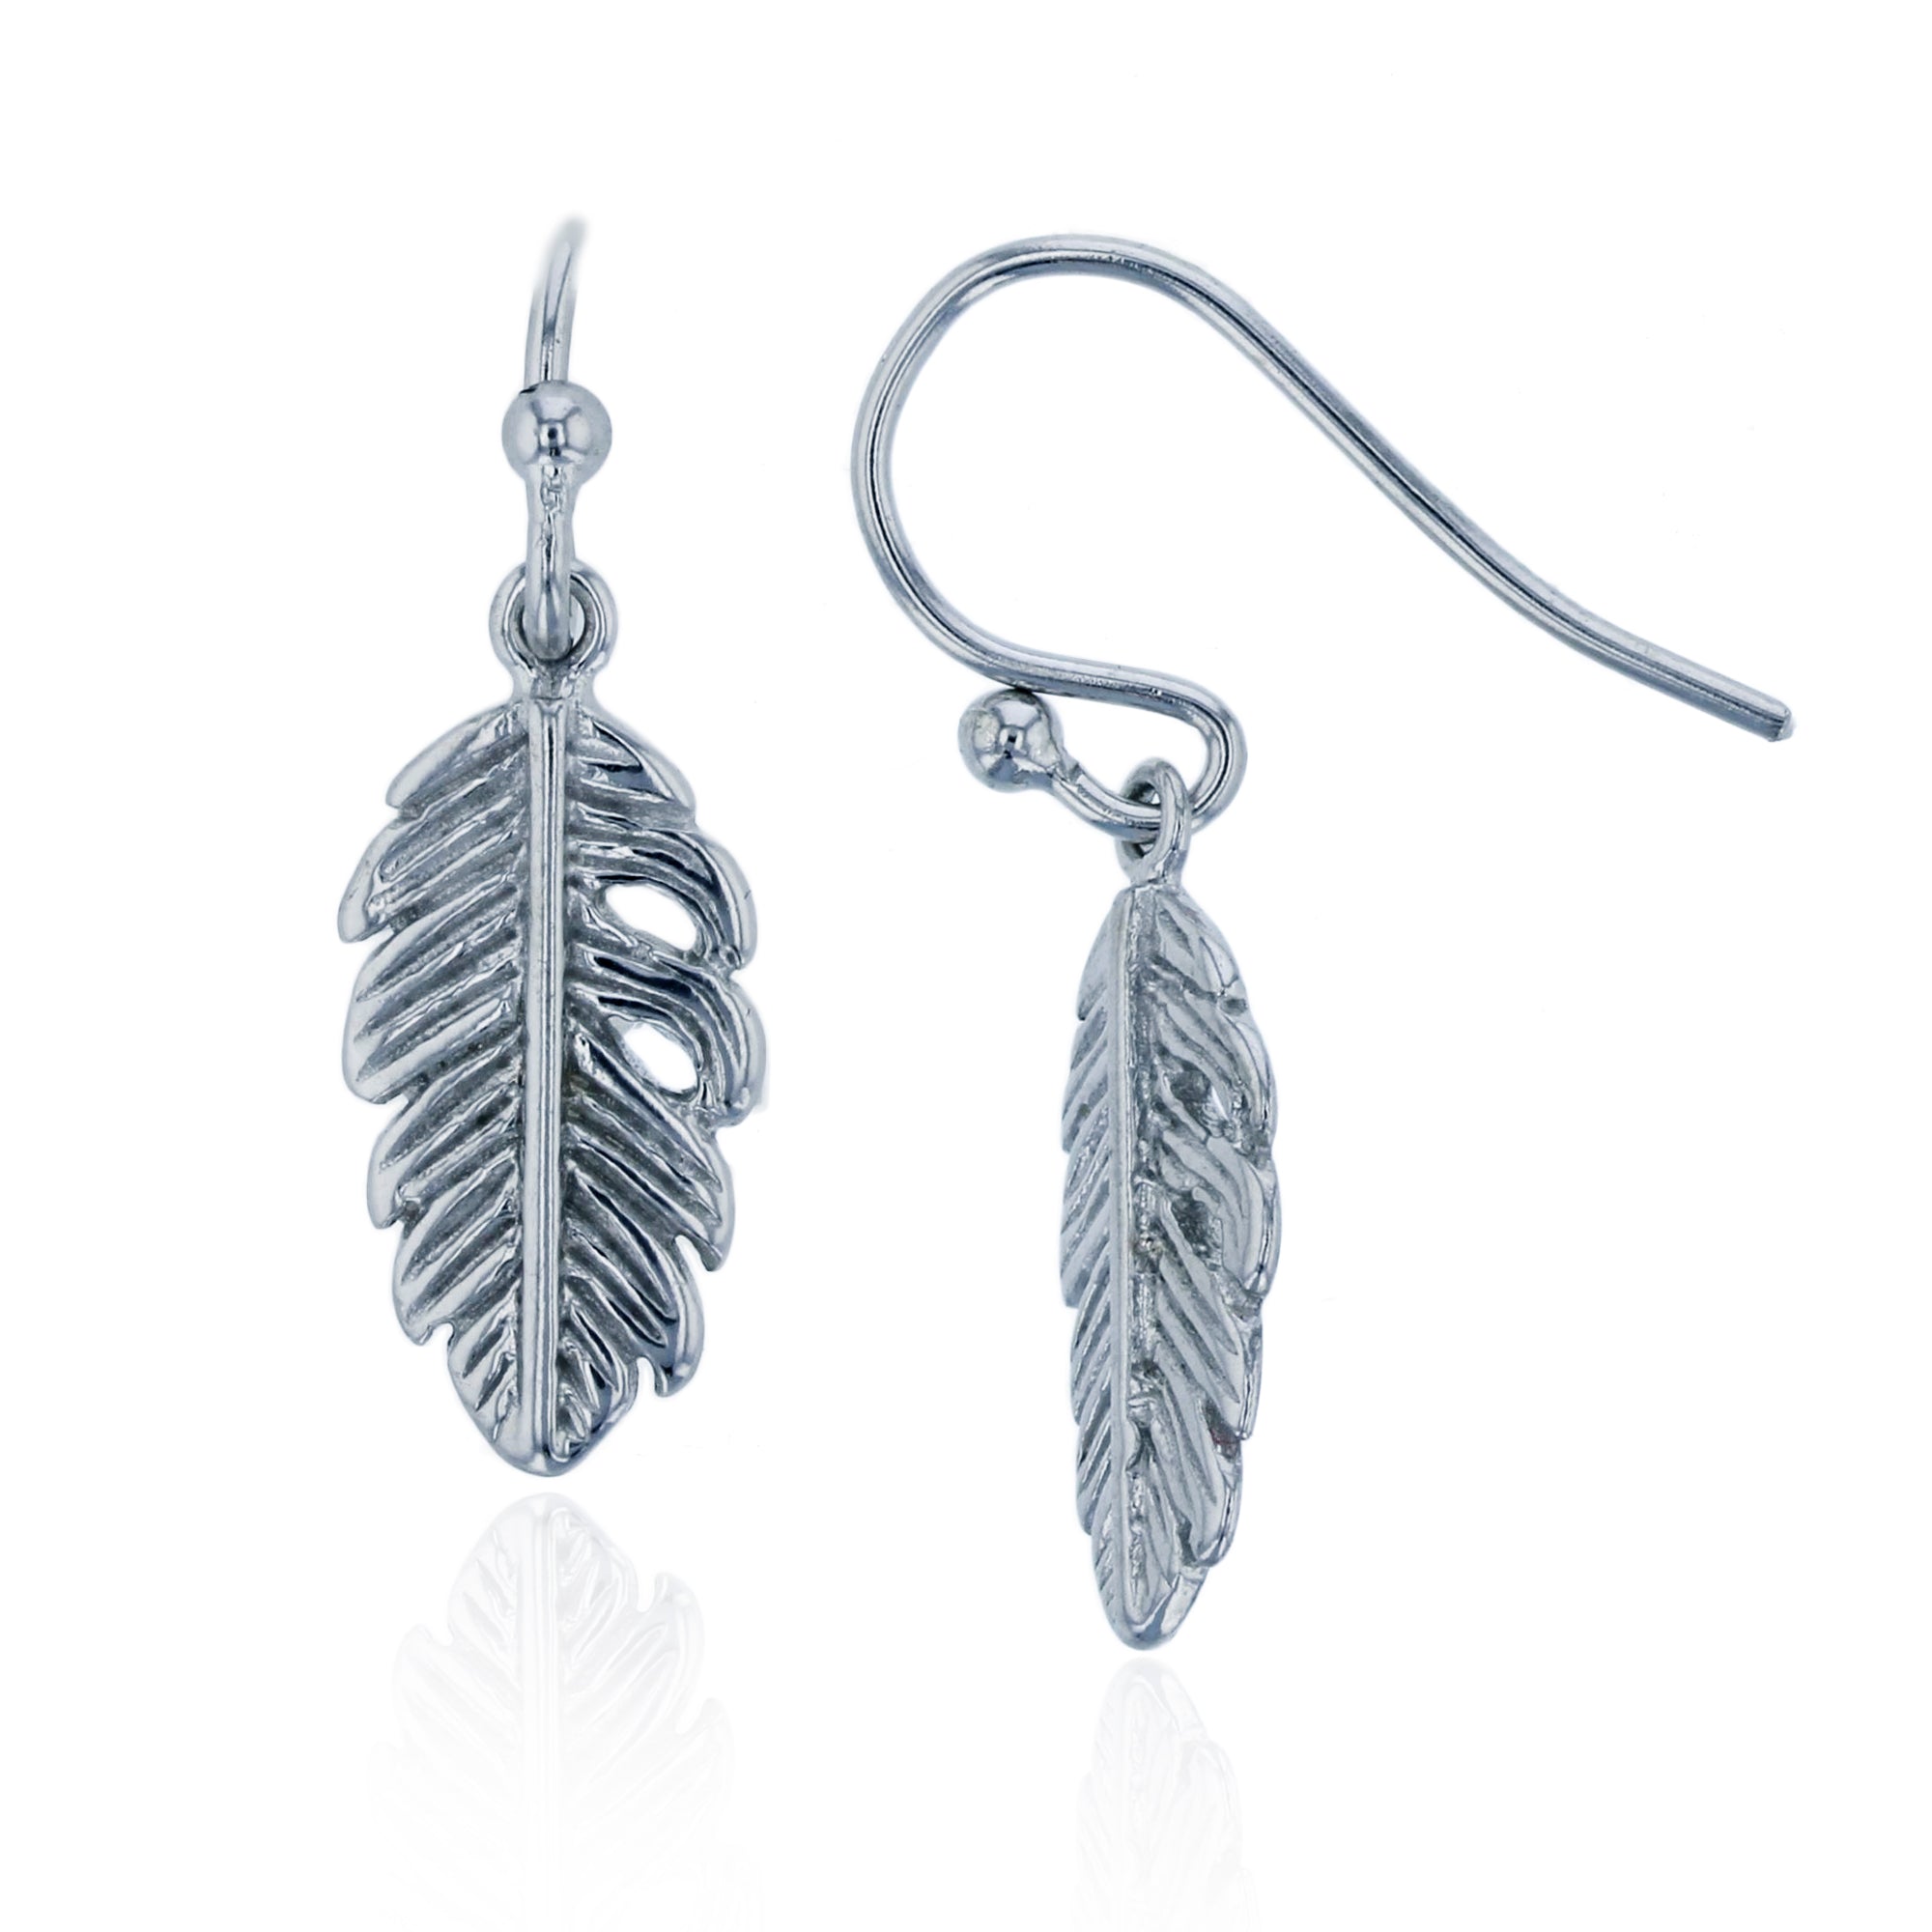 DECADENCE Sterling Silver Polished Rhodium Dangling Leaf Earrings